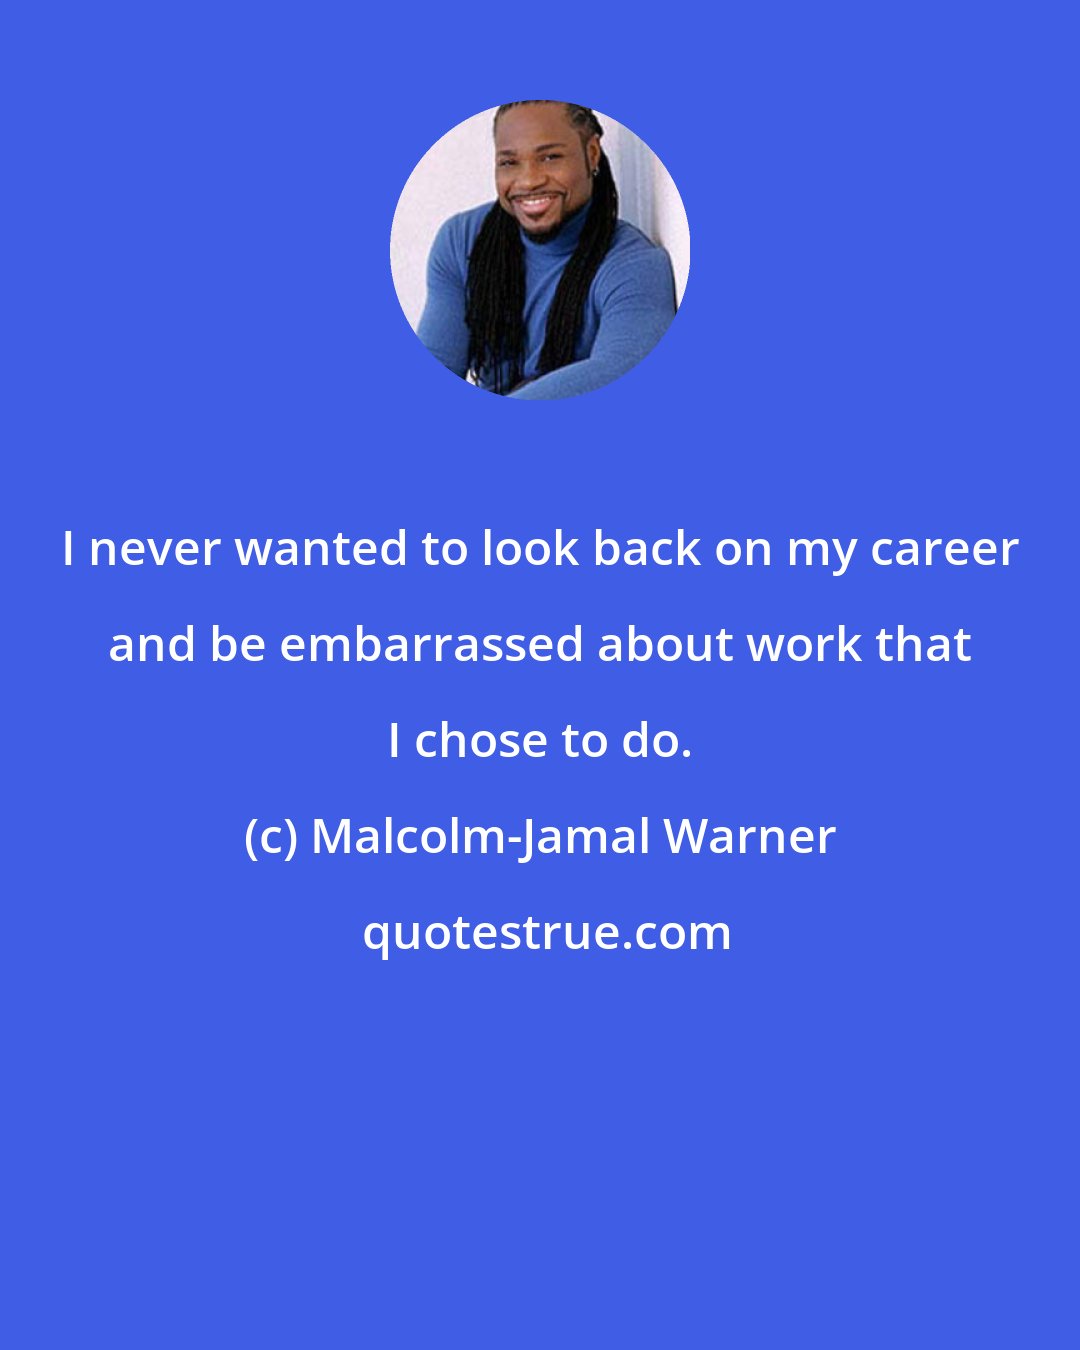 Malcolm-Jamal Warner: I never wanted to look back on my career and be embarrassed about work that I chose to do.